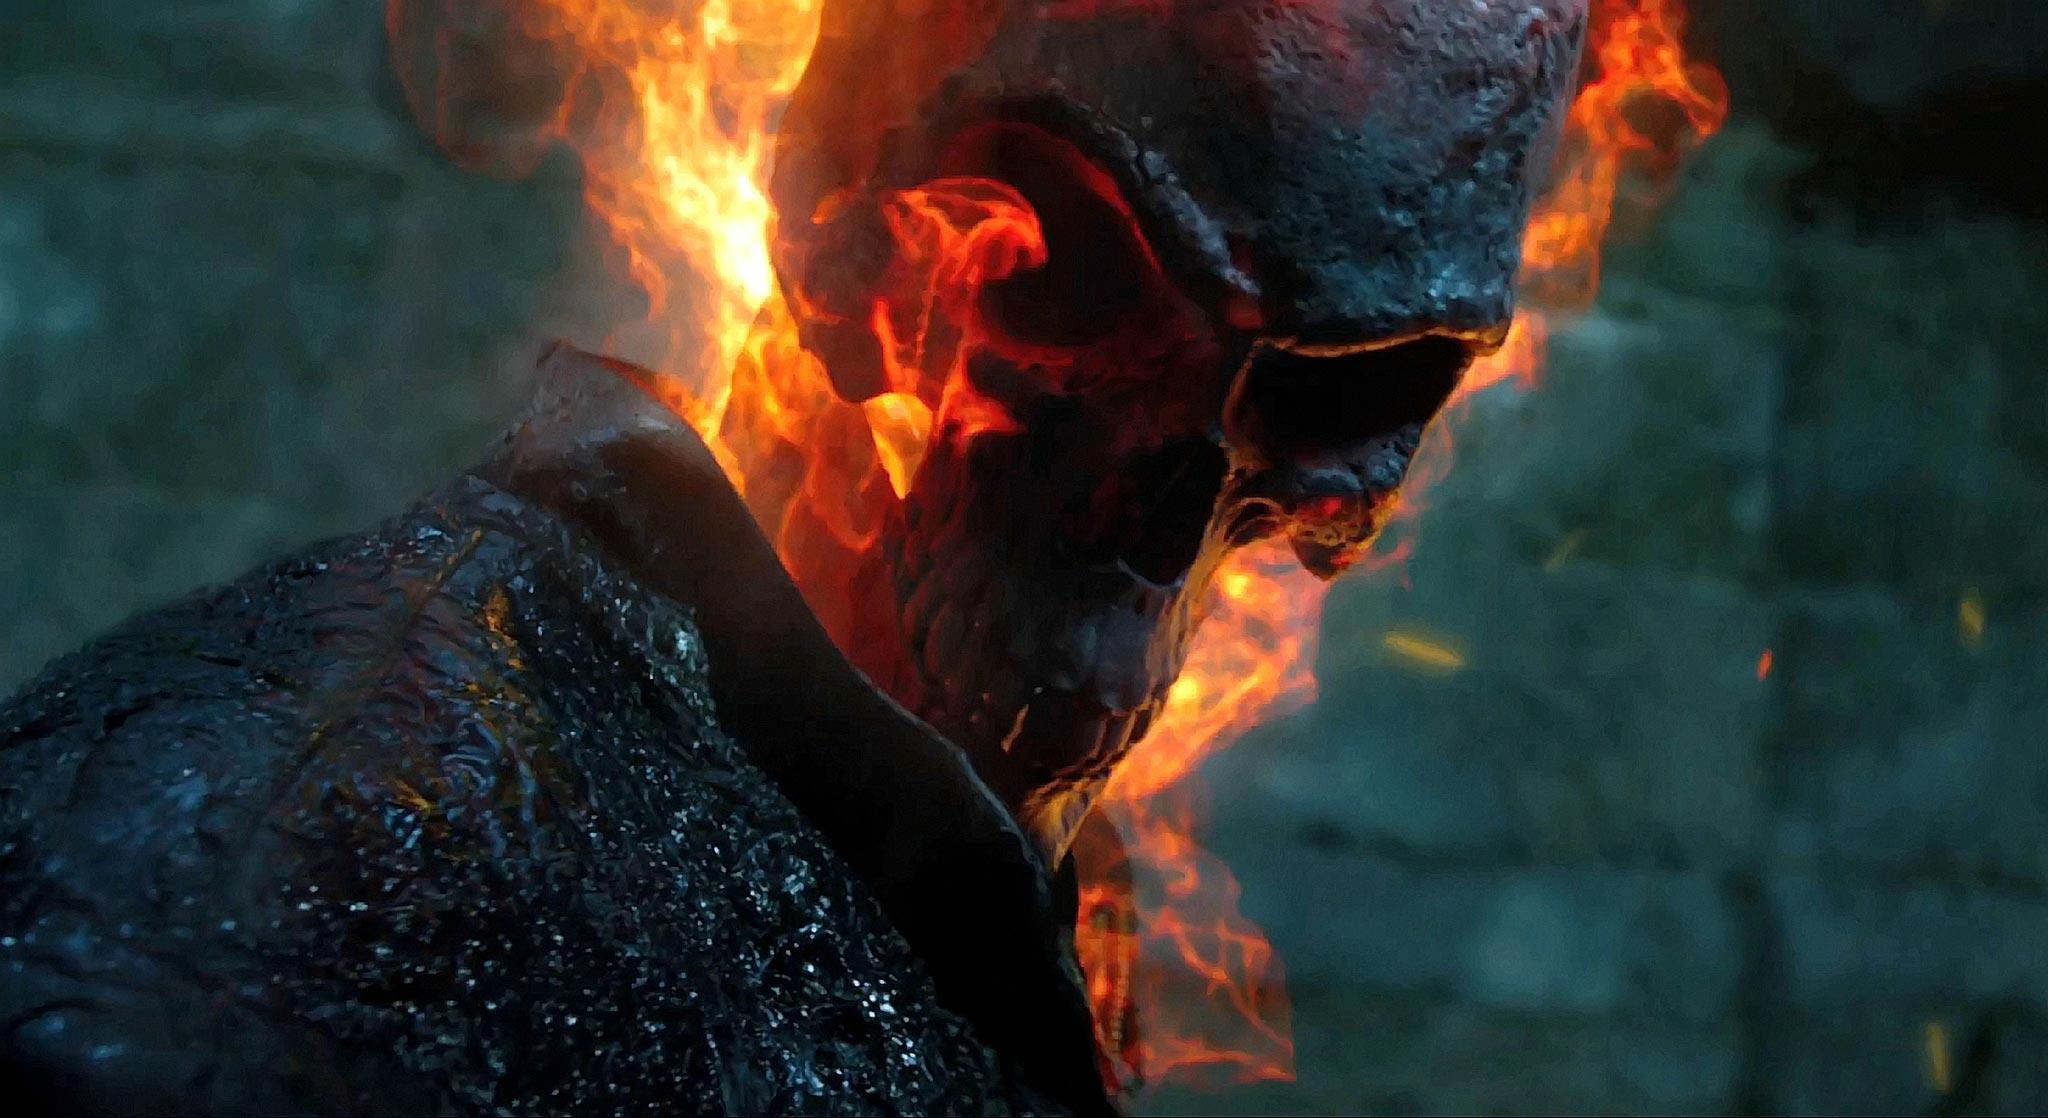 Ghost Rider Wallpapers 2015 Wallpaper Cave